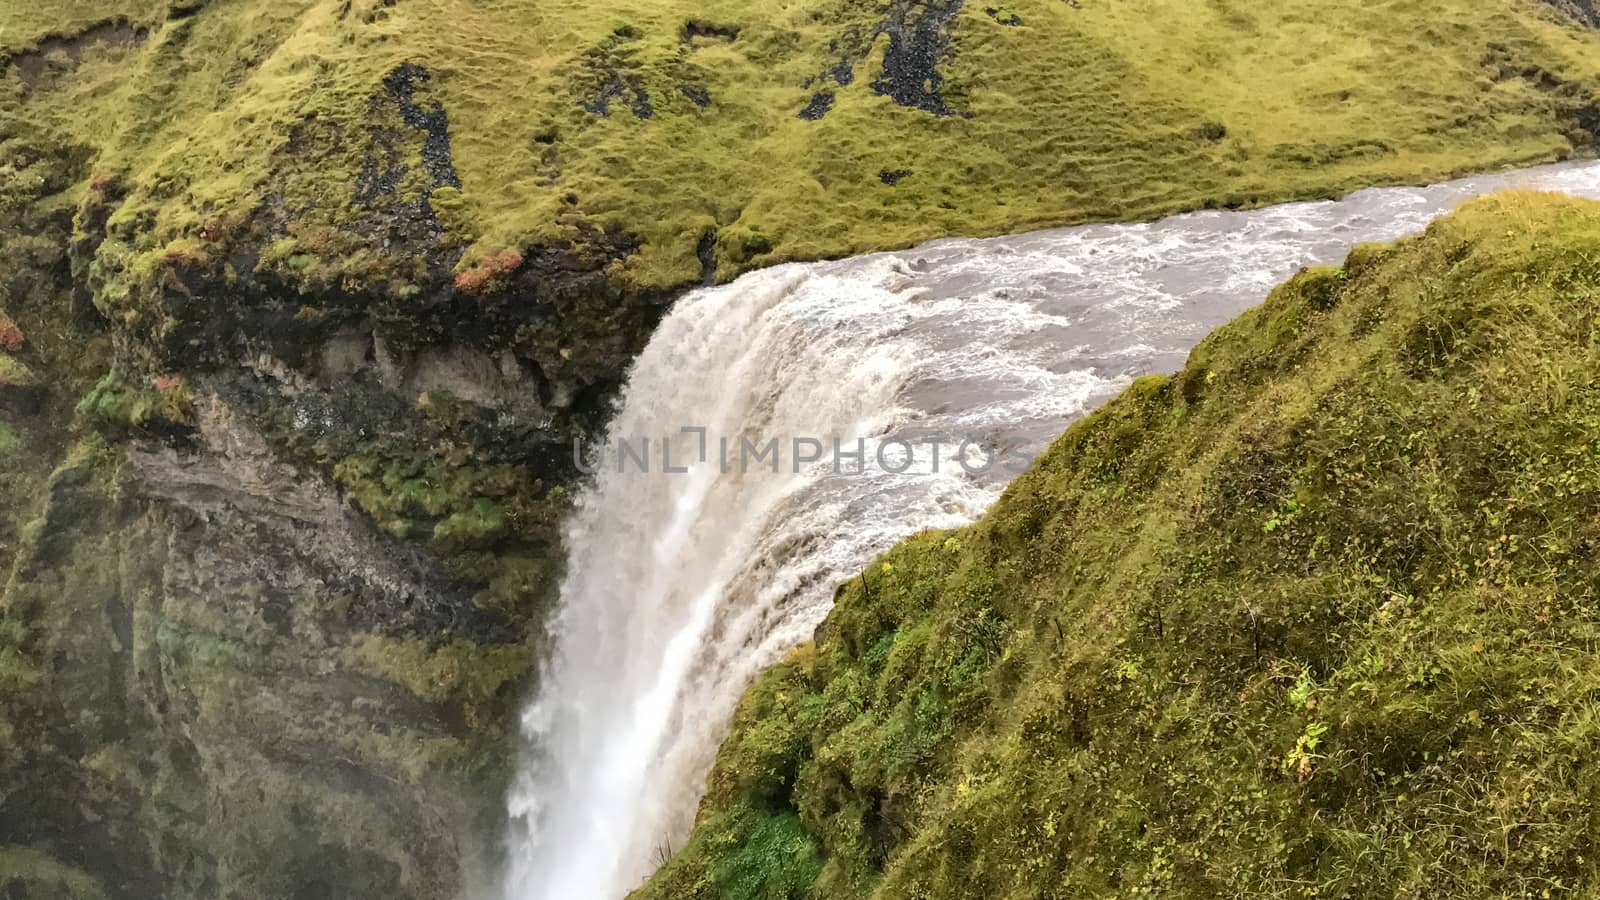 Skogafoss waterfall in Iceland during heavy rain seen from above